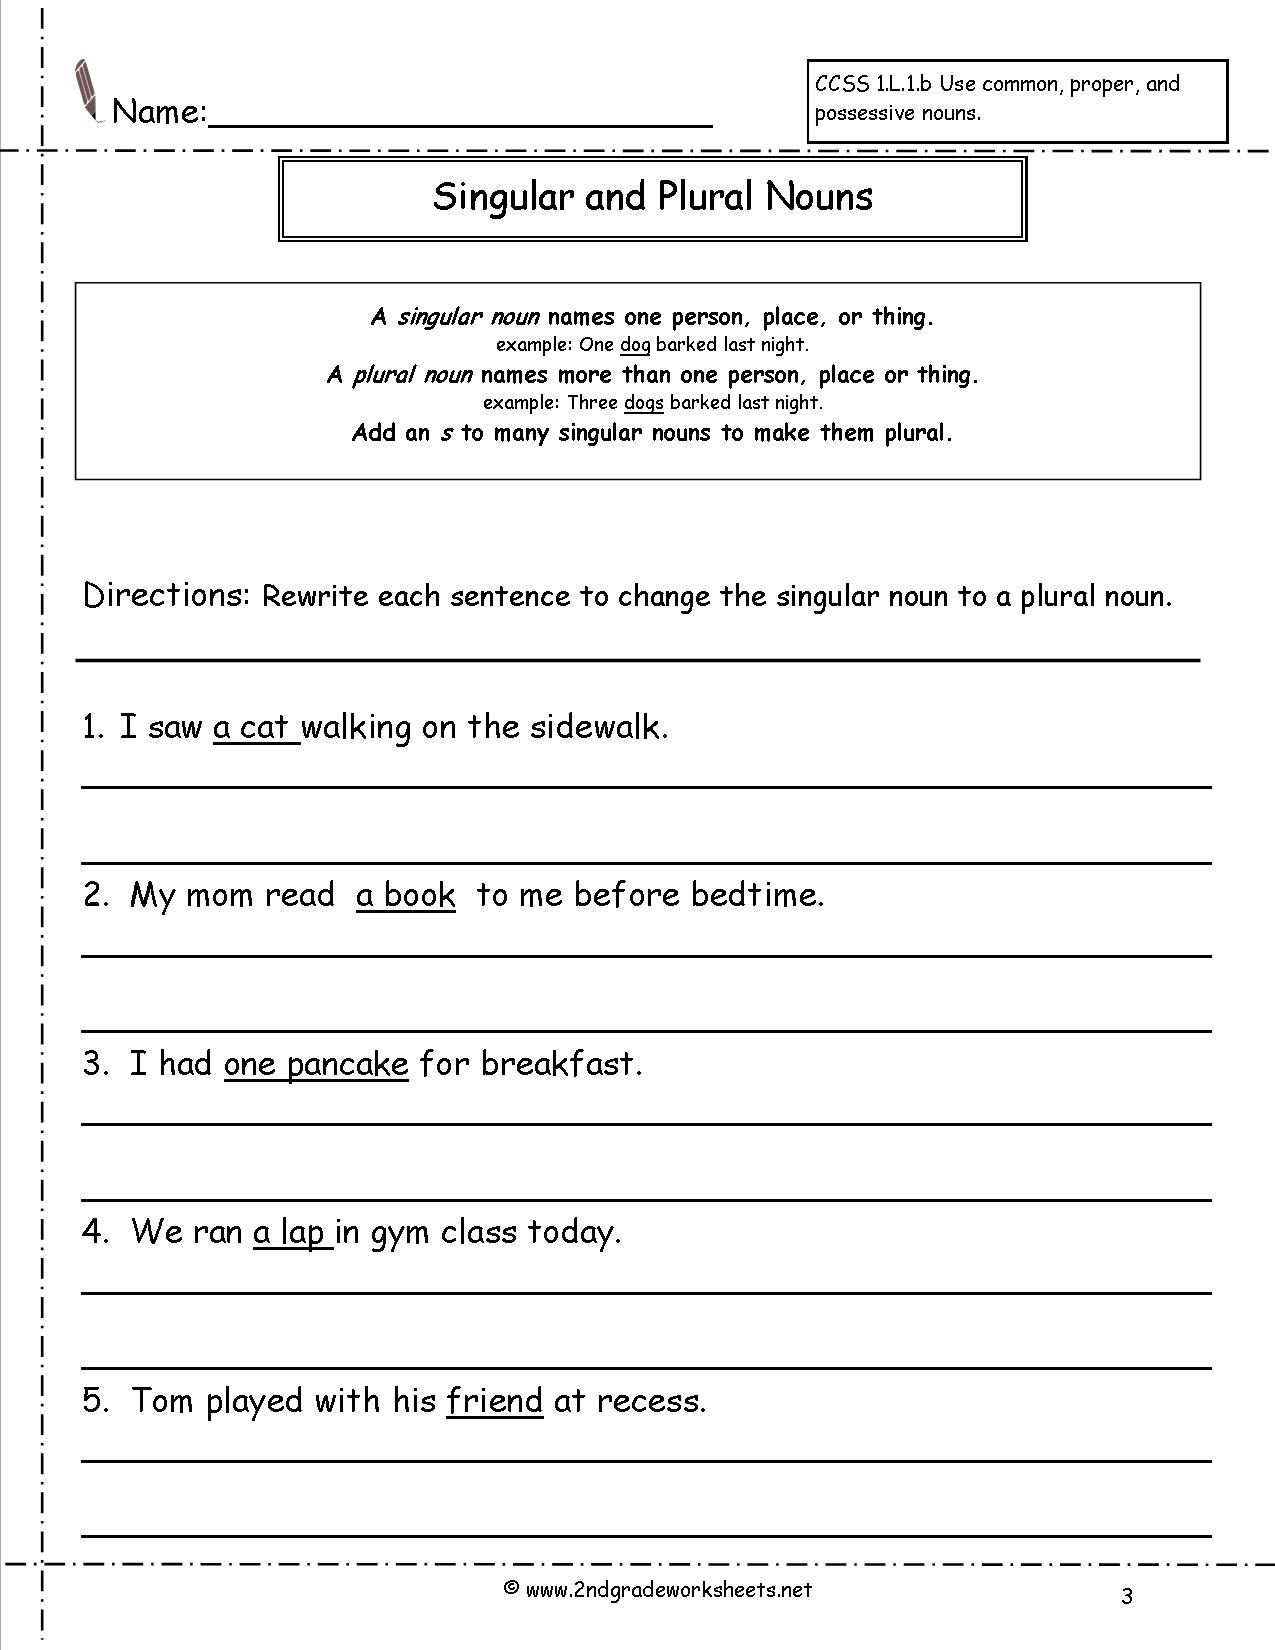 16 Best Images Of Singular And Plural Noun Worksheets Sentences Singular And Plural Nouns